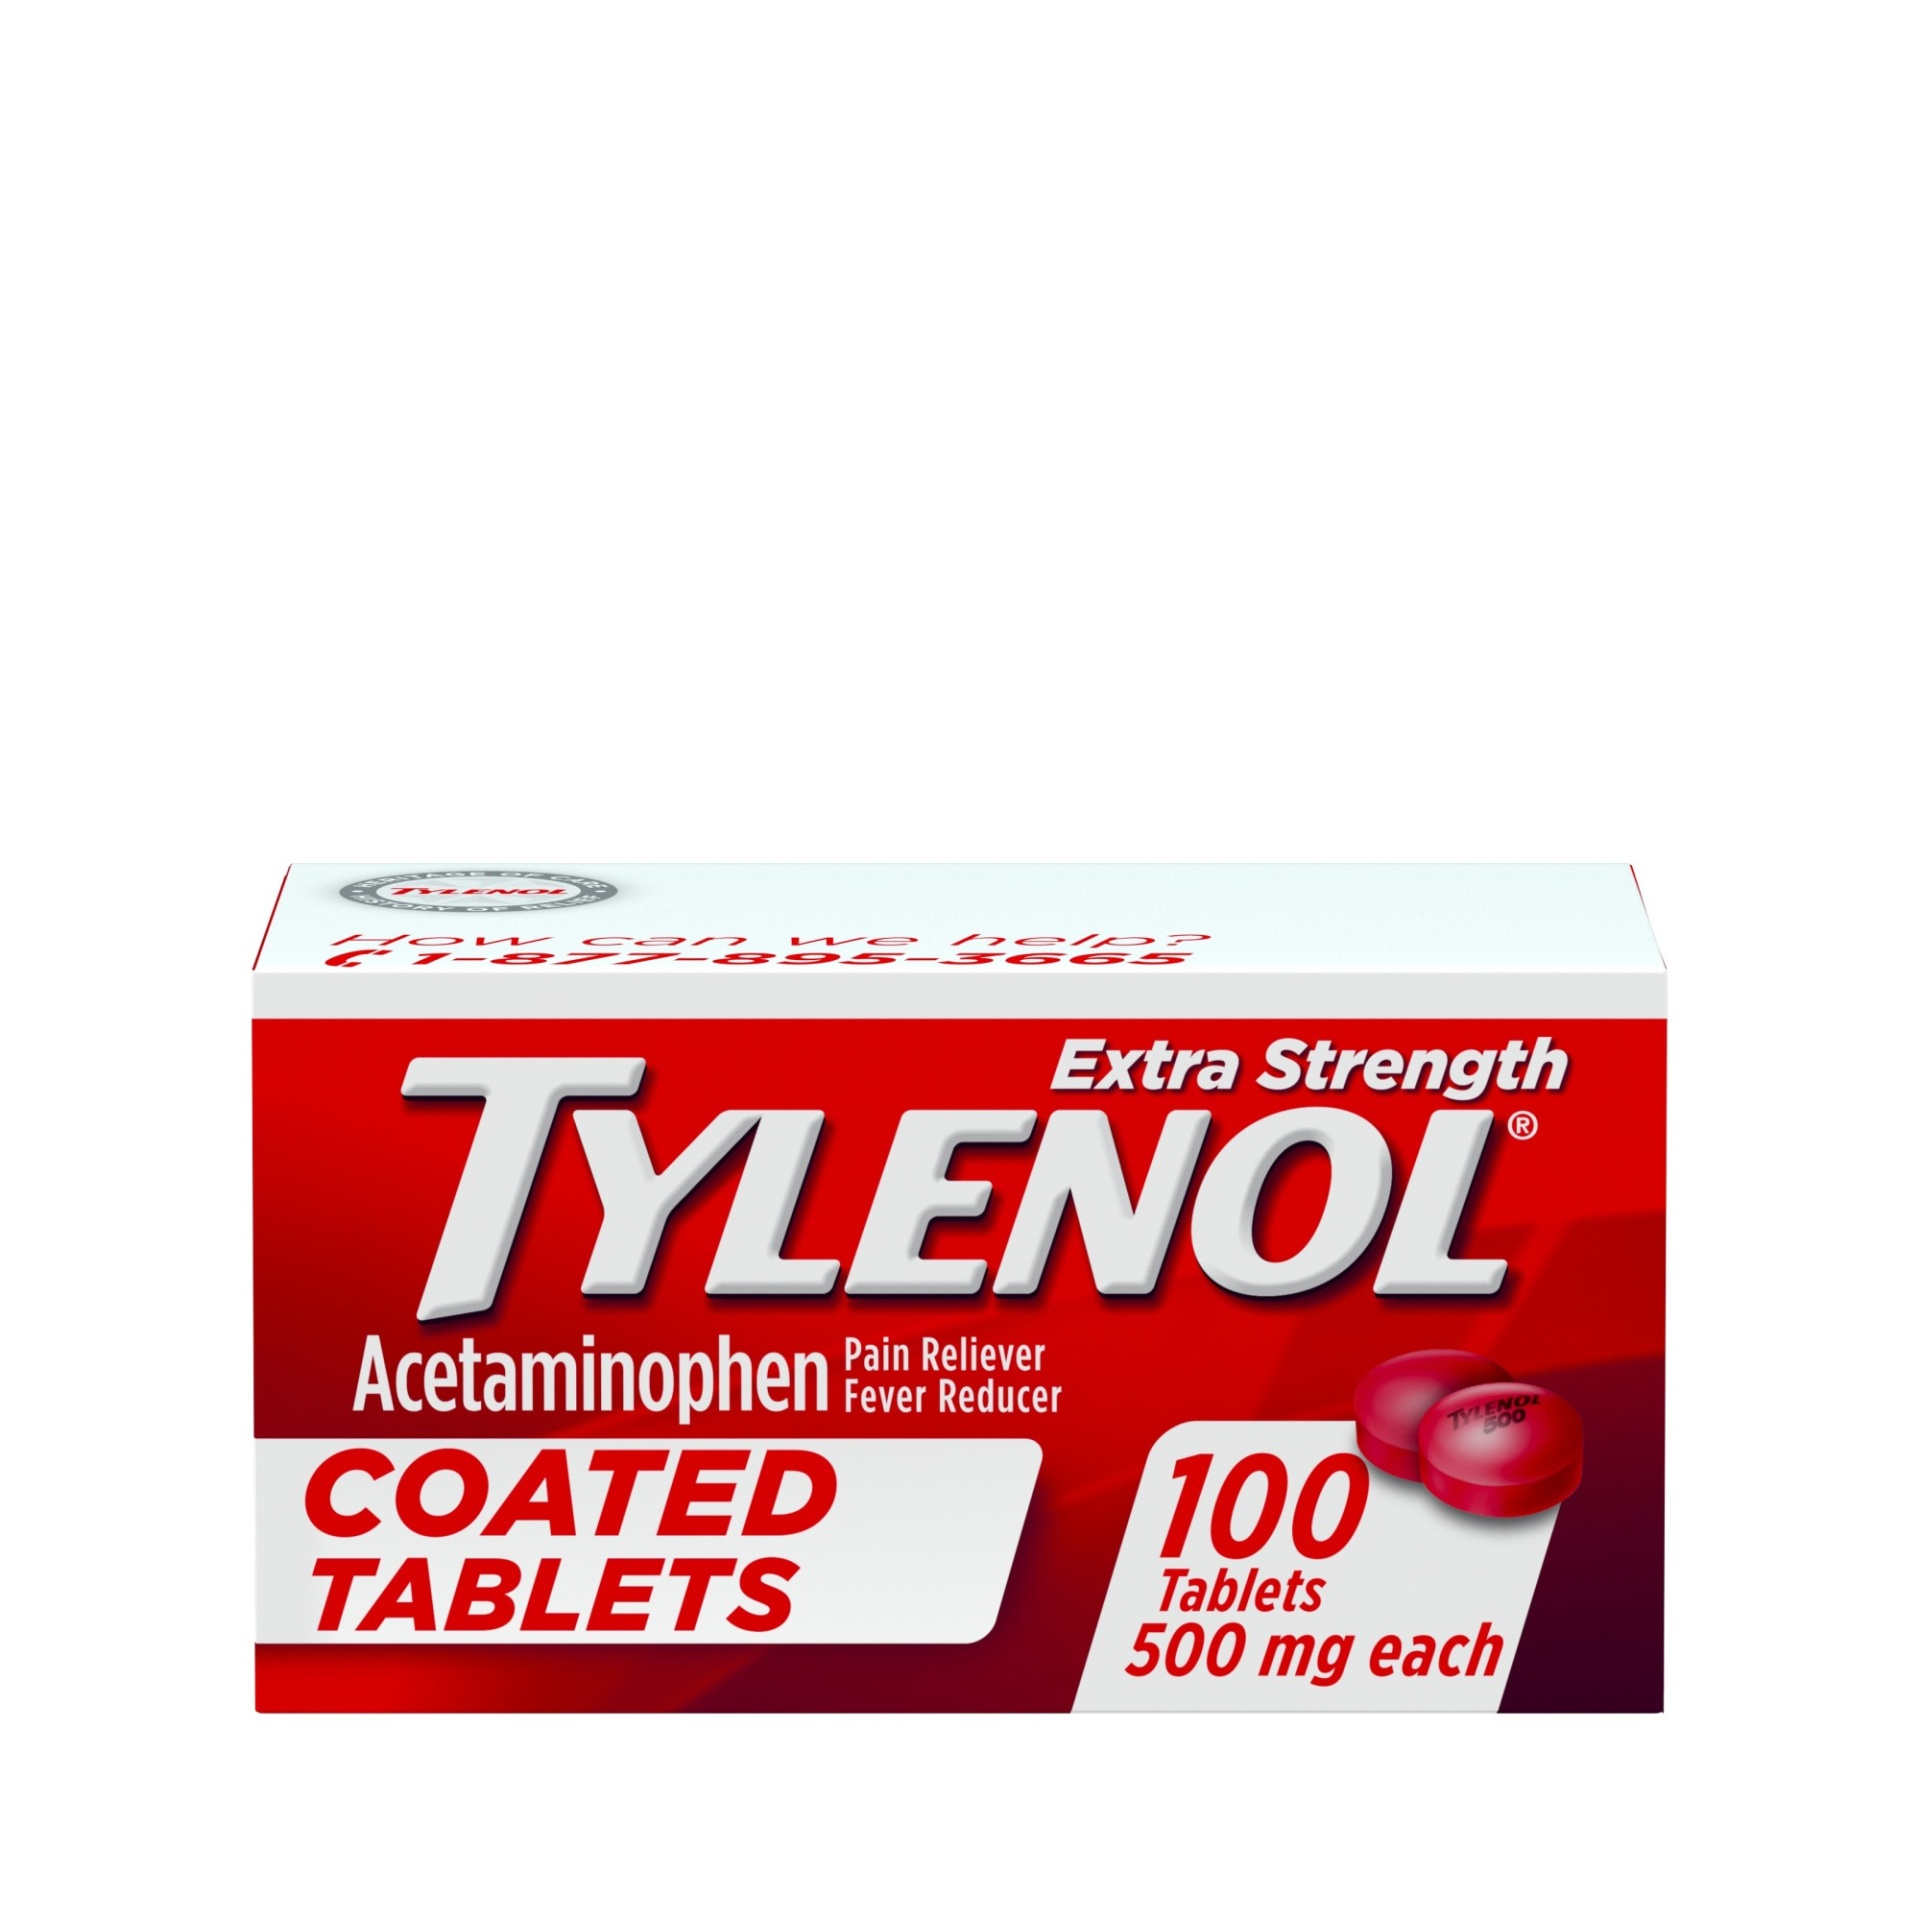 slide 1 of 6, Tylenol Extra Strength Pain Relief Coated Tablets for Adults, 500mg Acetaminophen Pain Reliever and Fever Reducer per Tablet for Minor Aches, Pains, and Headaches, 100 ct